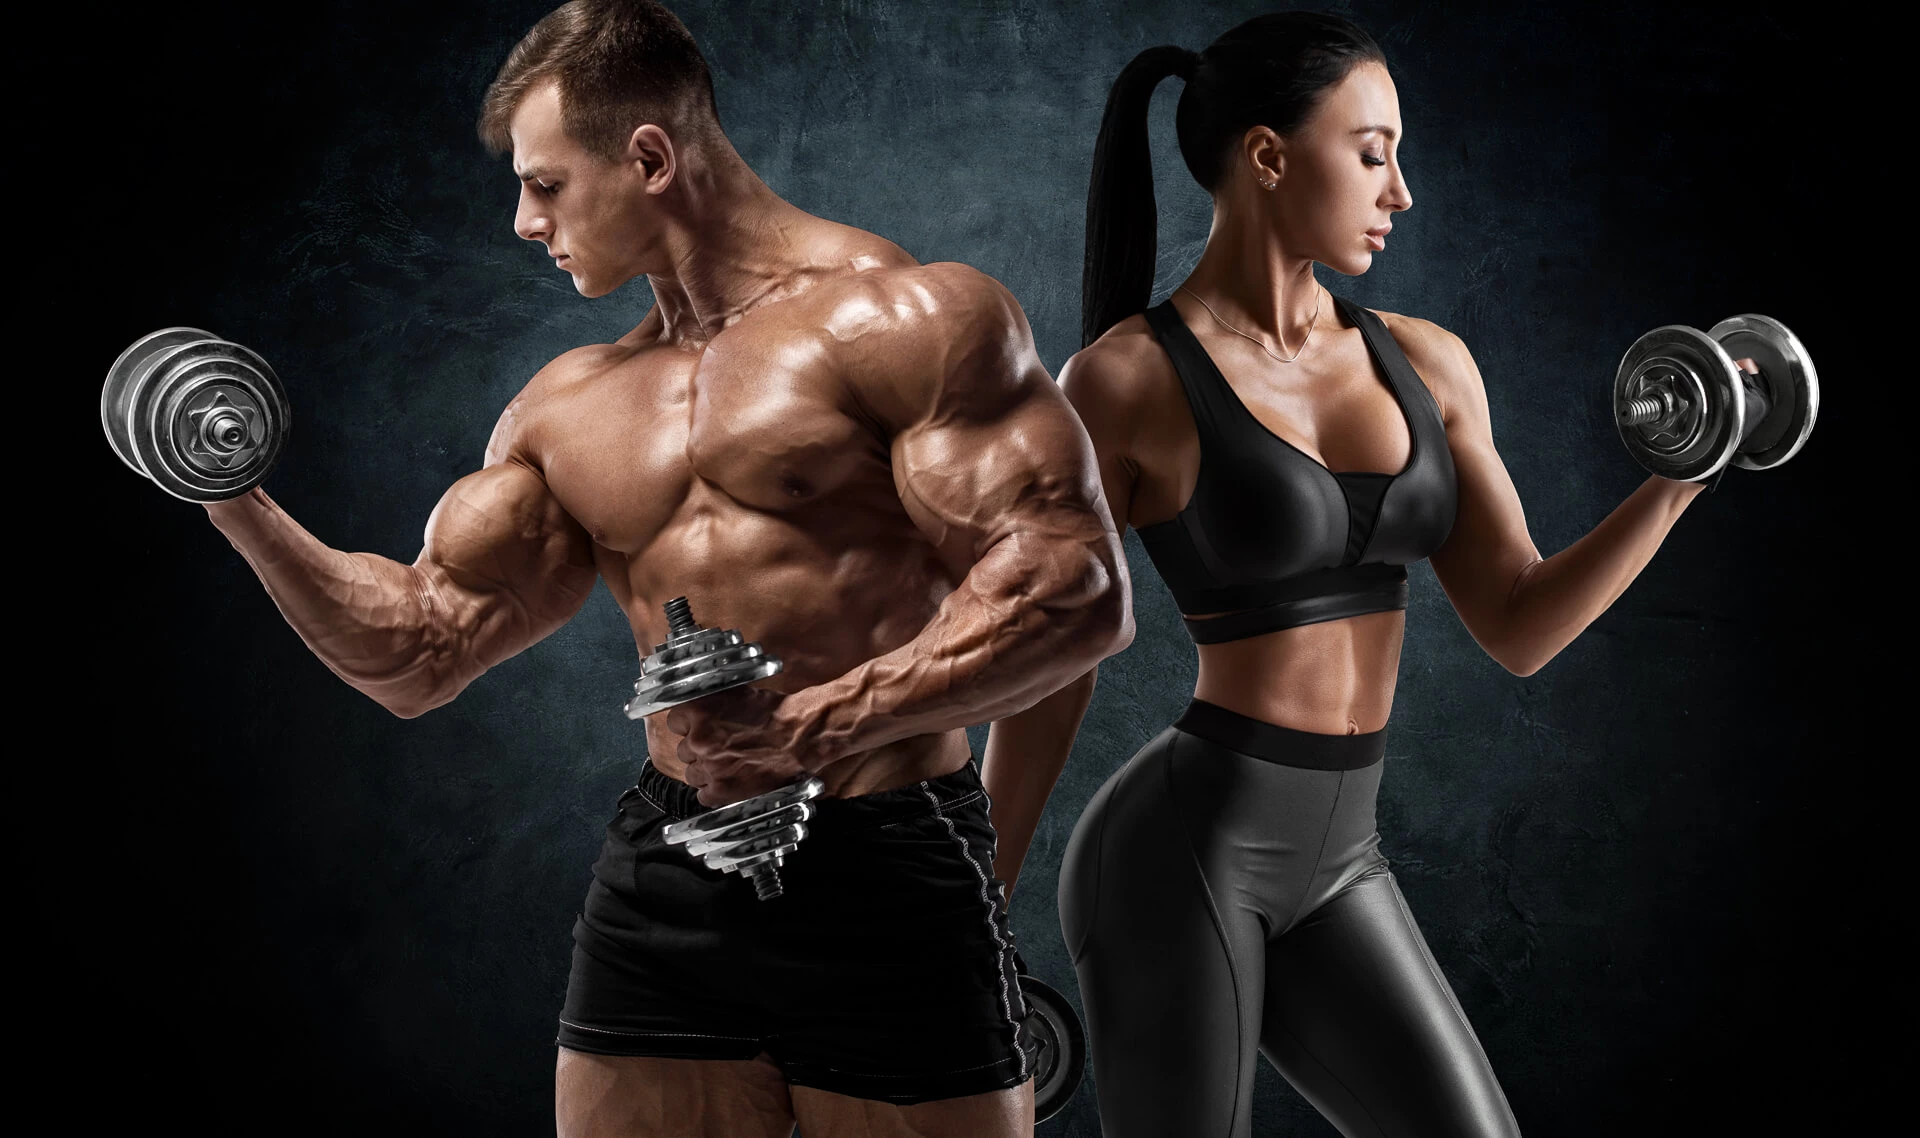 Steroids myths. Most common myths about steroids.